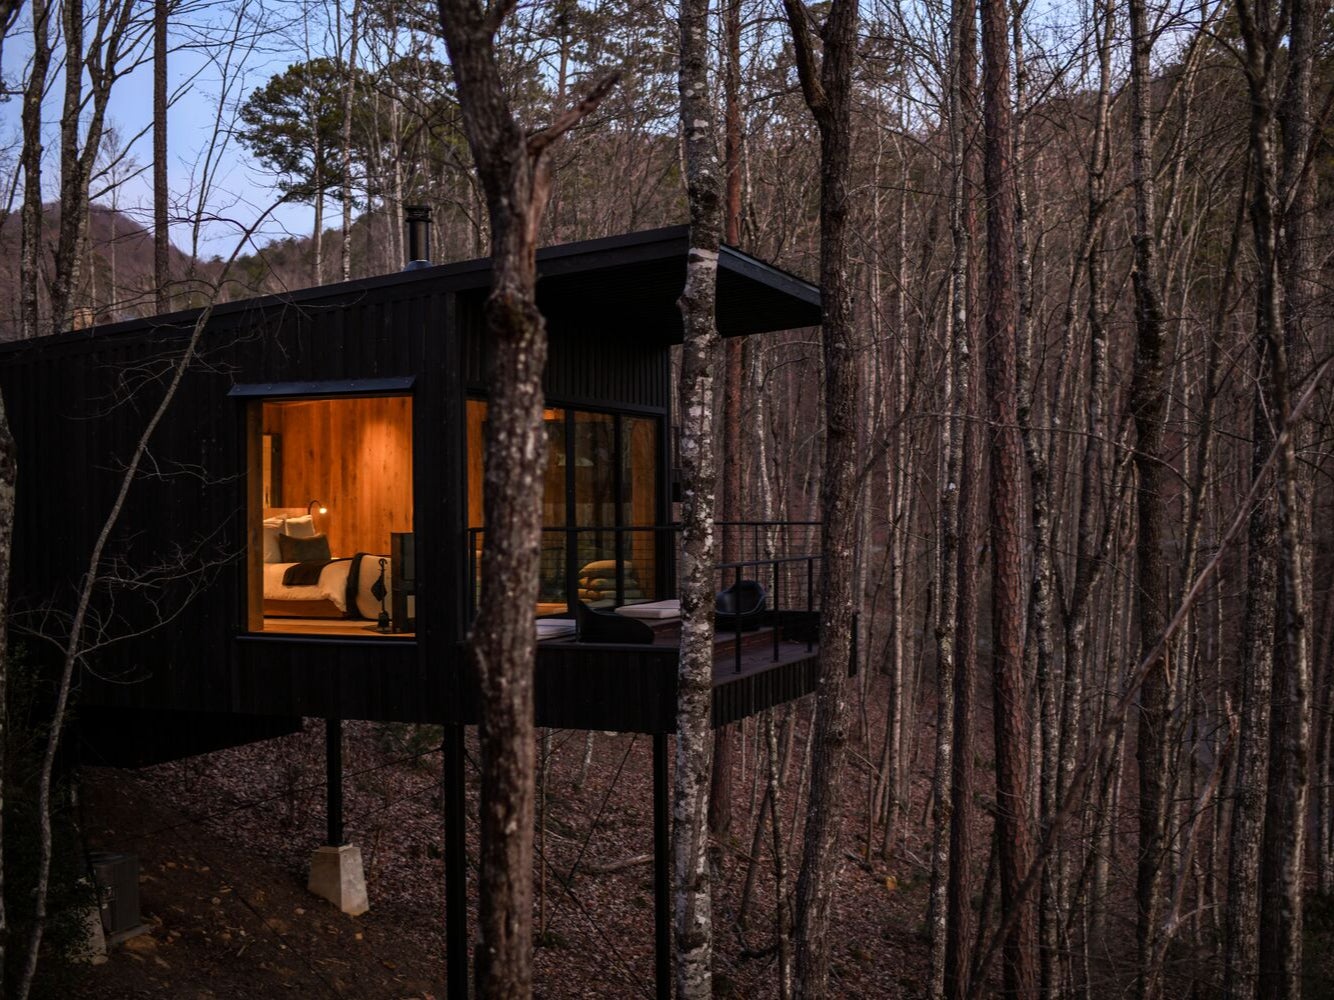 Treehouses make for an immersive nature experience at Blackberry Mountain